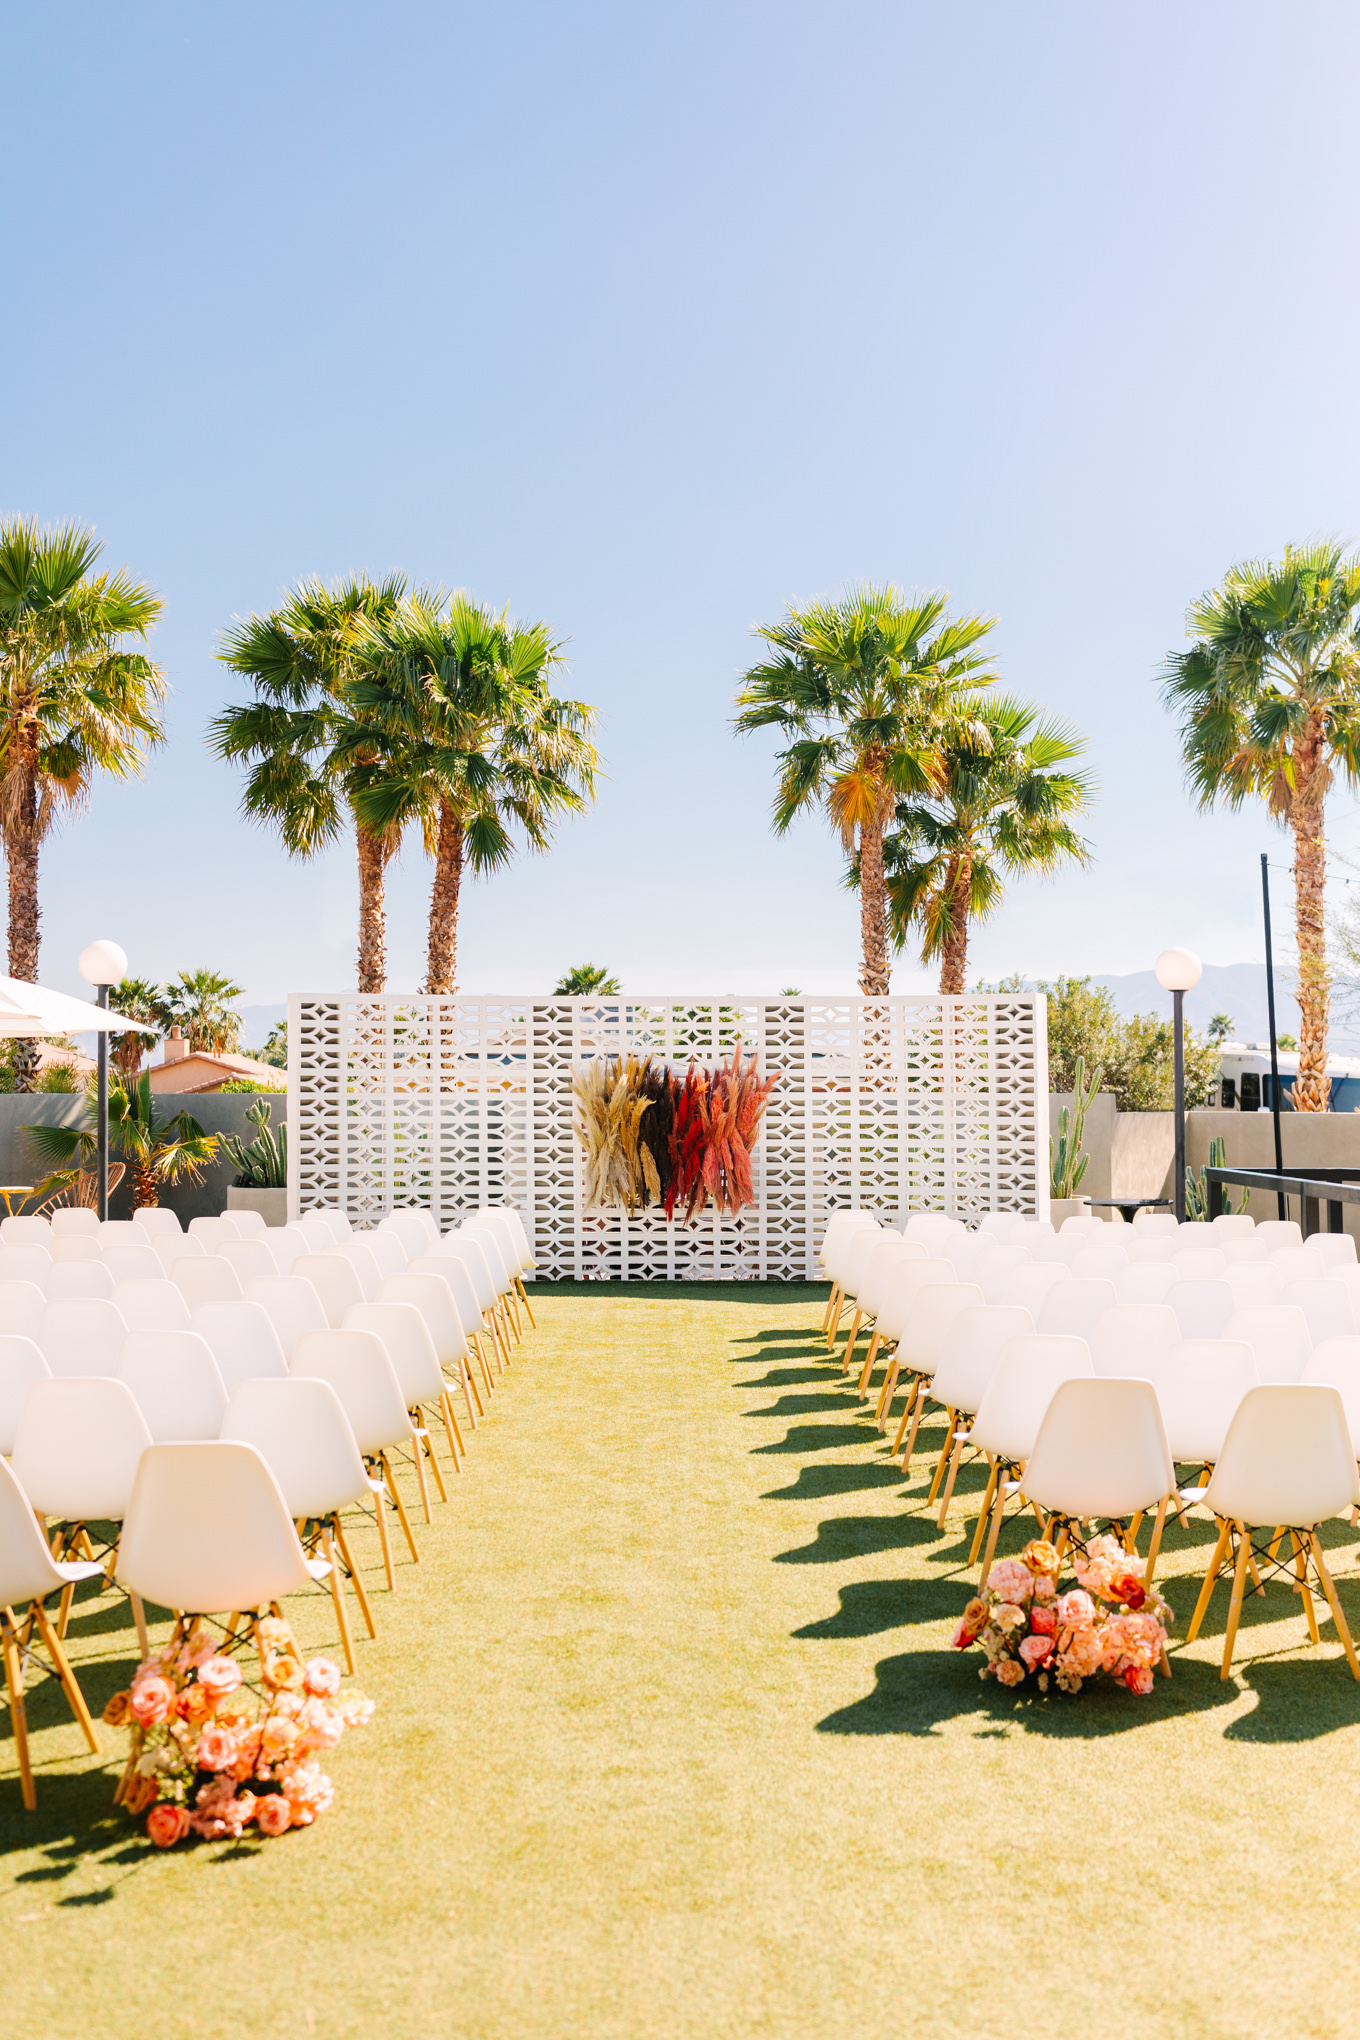 Colorful ceremony site with palm trees | Pink and orange Lautner Compound wedding | Colorful Palm Springs wedding photography | #palmspringsphotographer #palmspringswedding #lautnercompound #southerncaliforniawedding  Source: Mary Costa Photography | Los Angeles